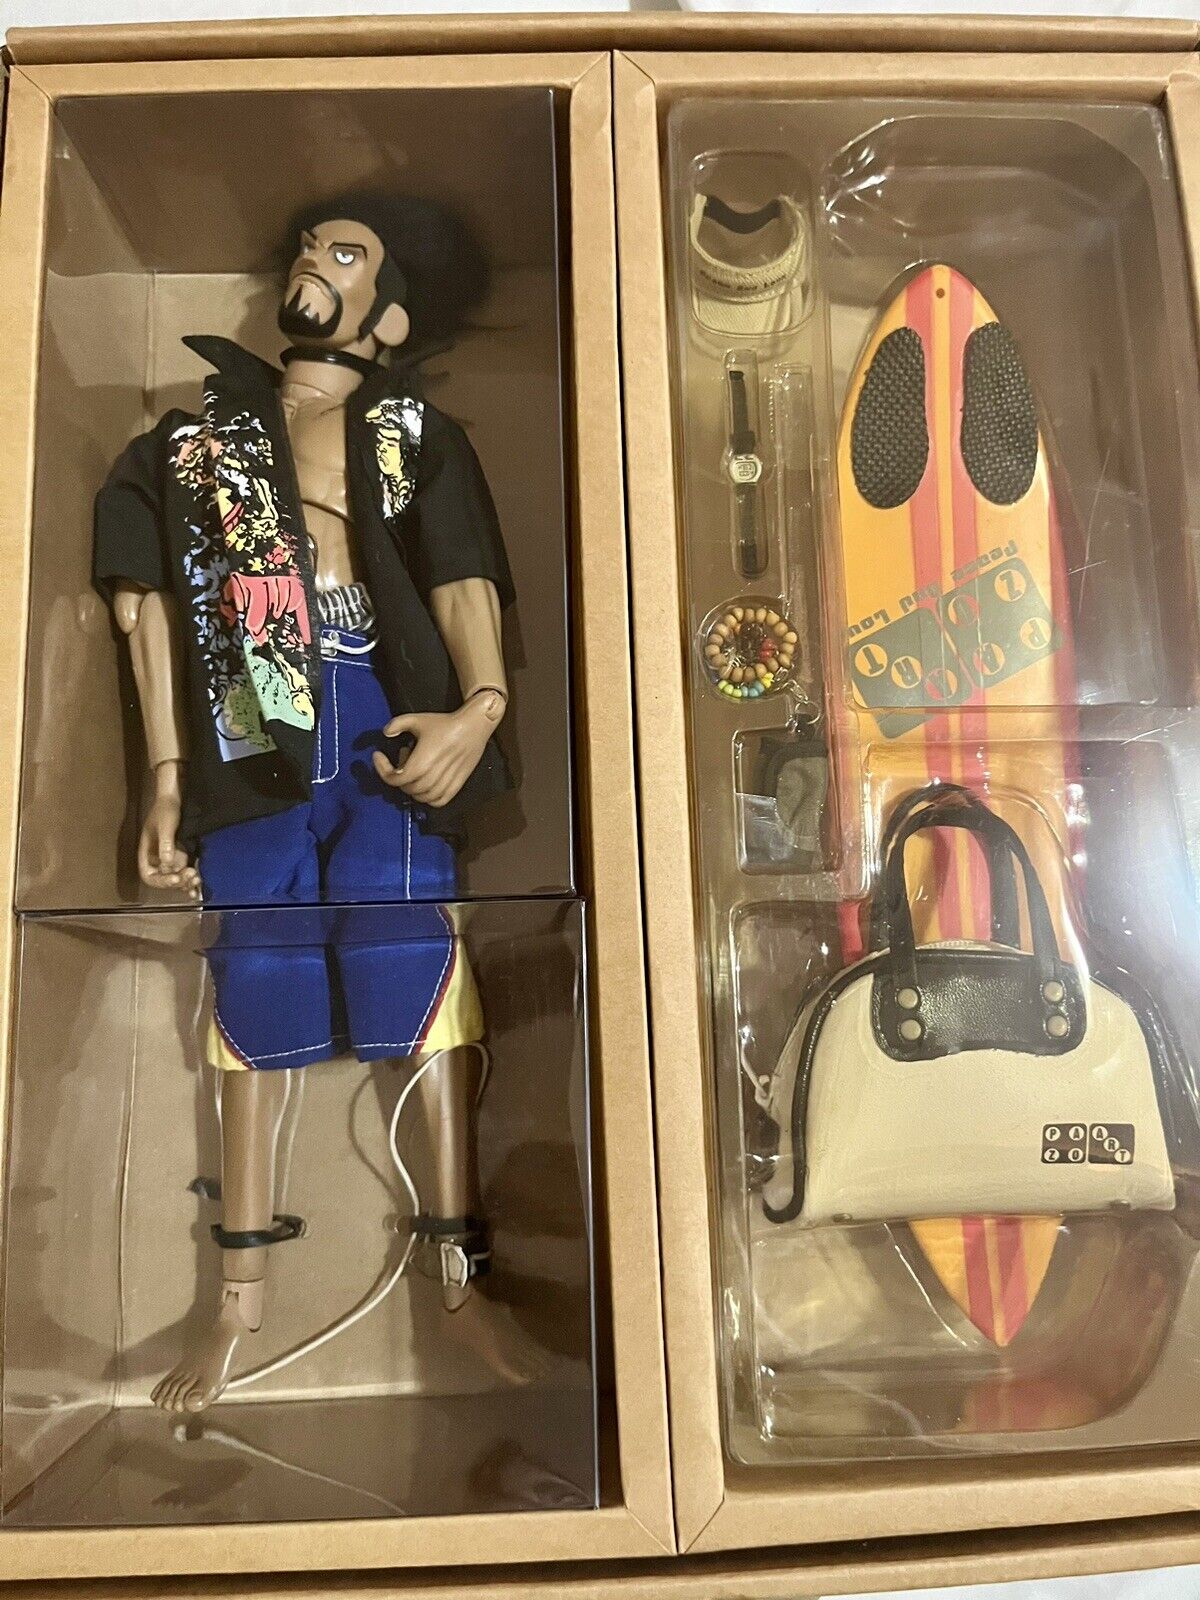 Hot Toys Pazo Art Enjoy The Surfing World Angry